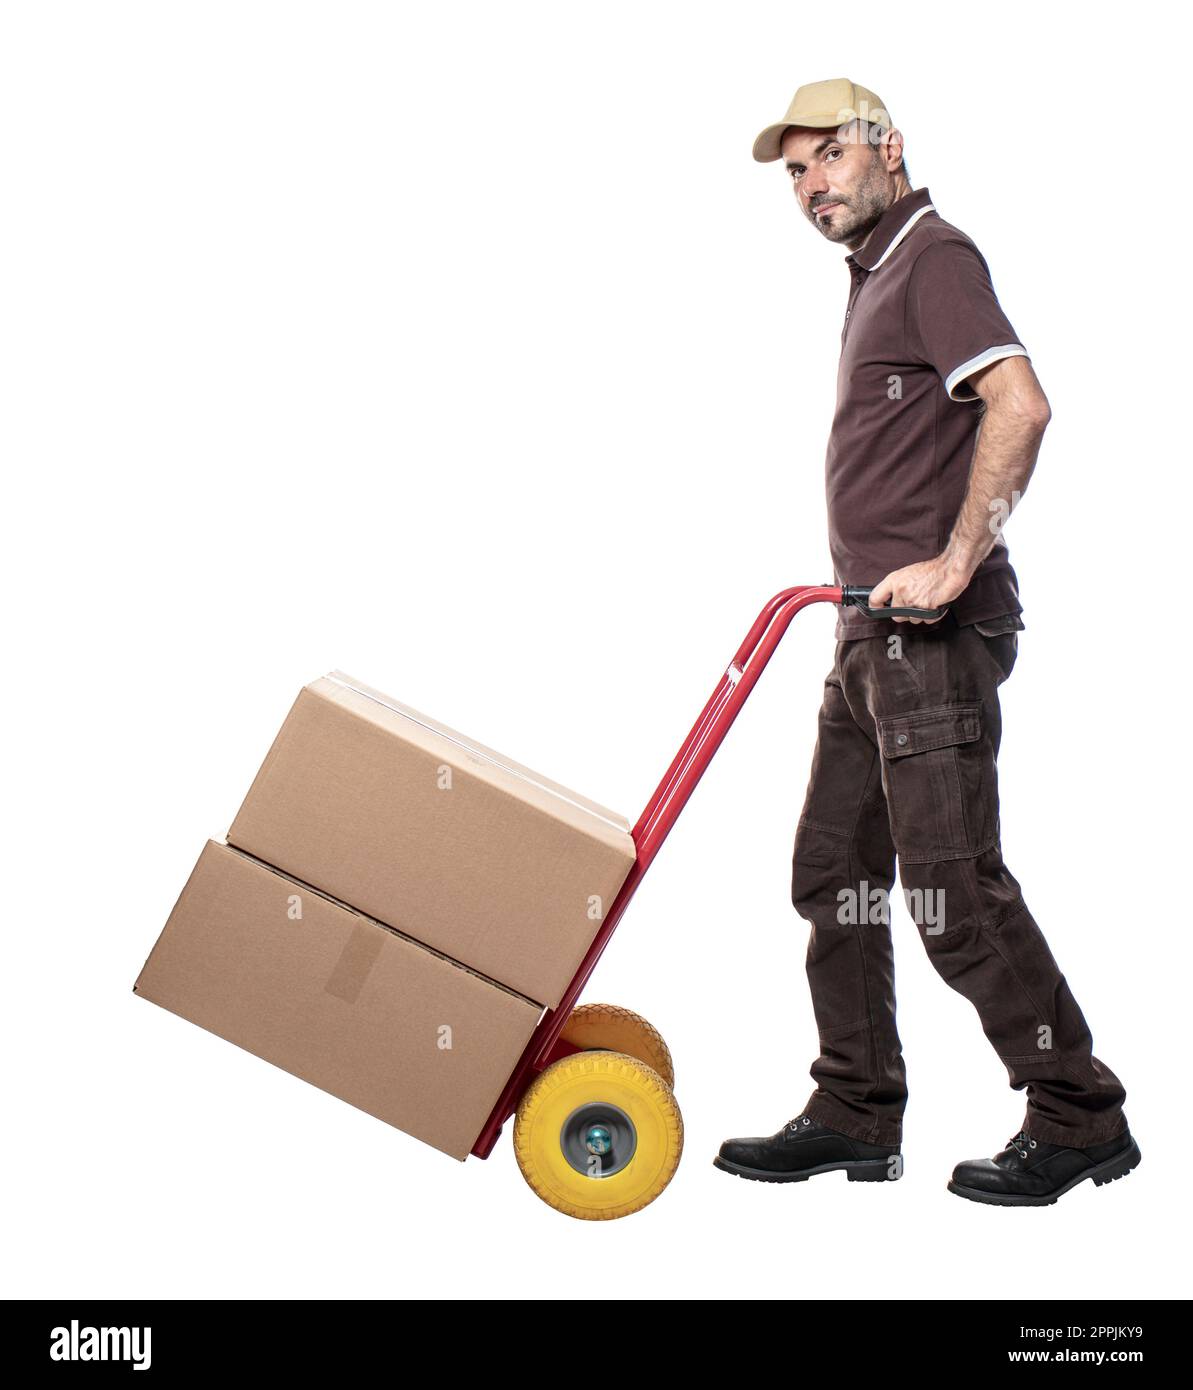 man with handtruck and big parcels Stock Photo